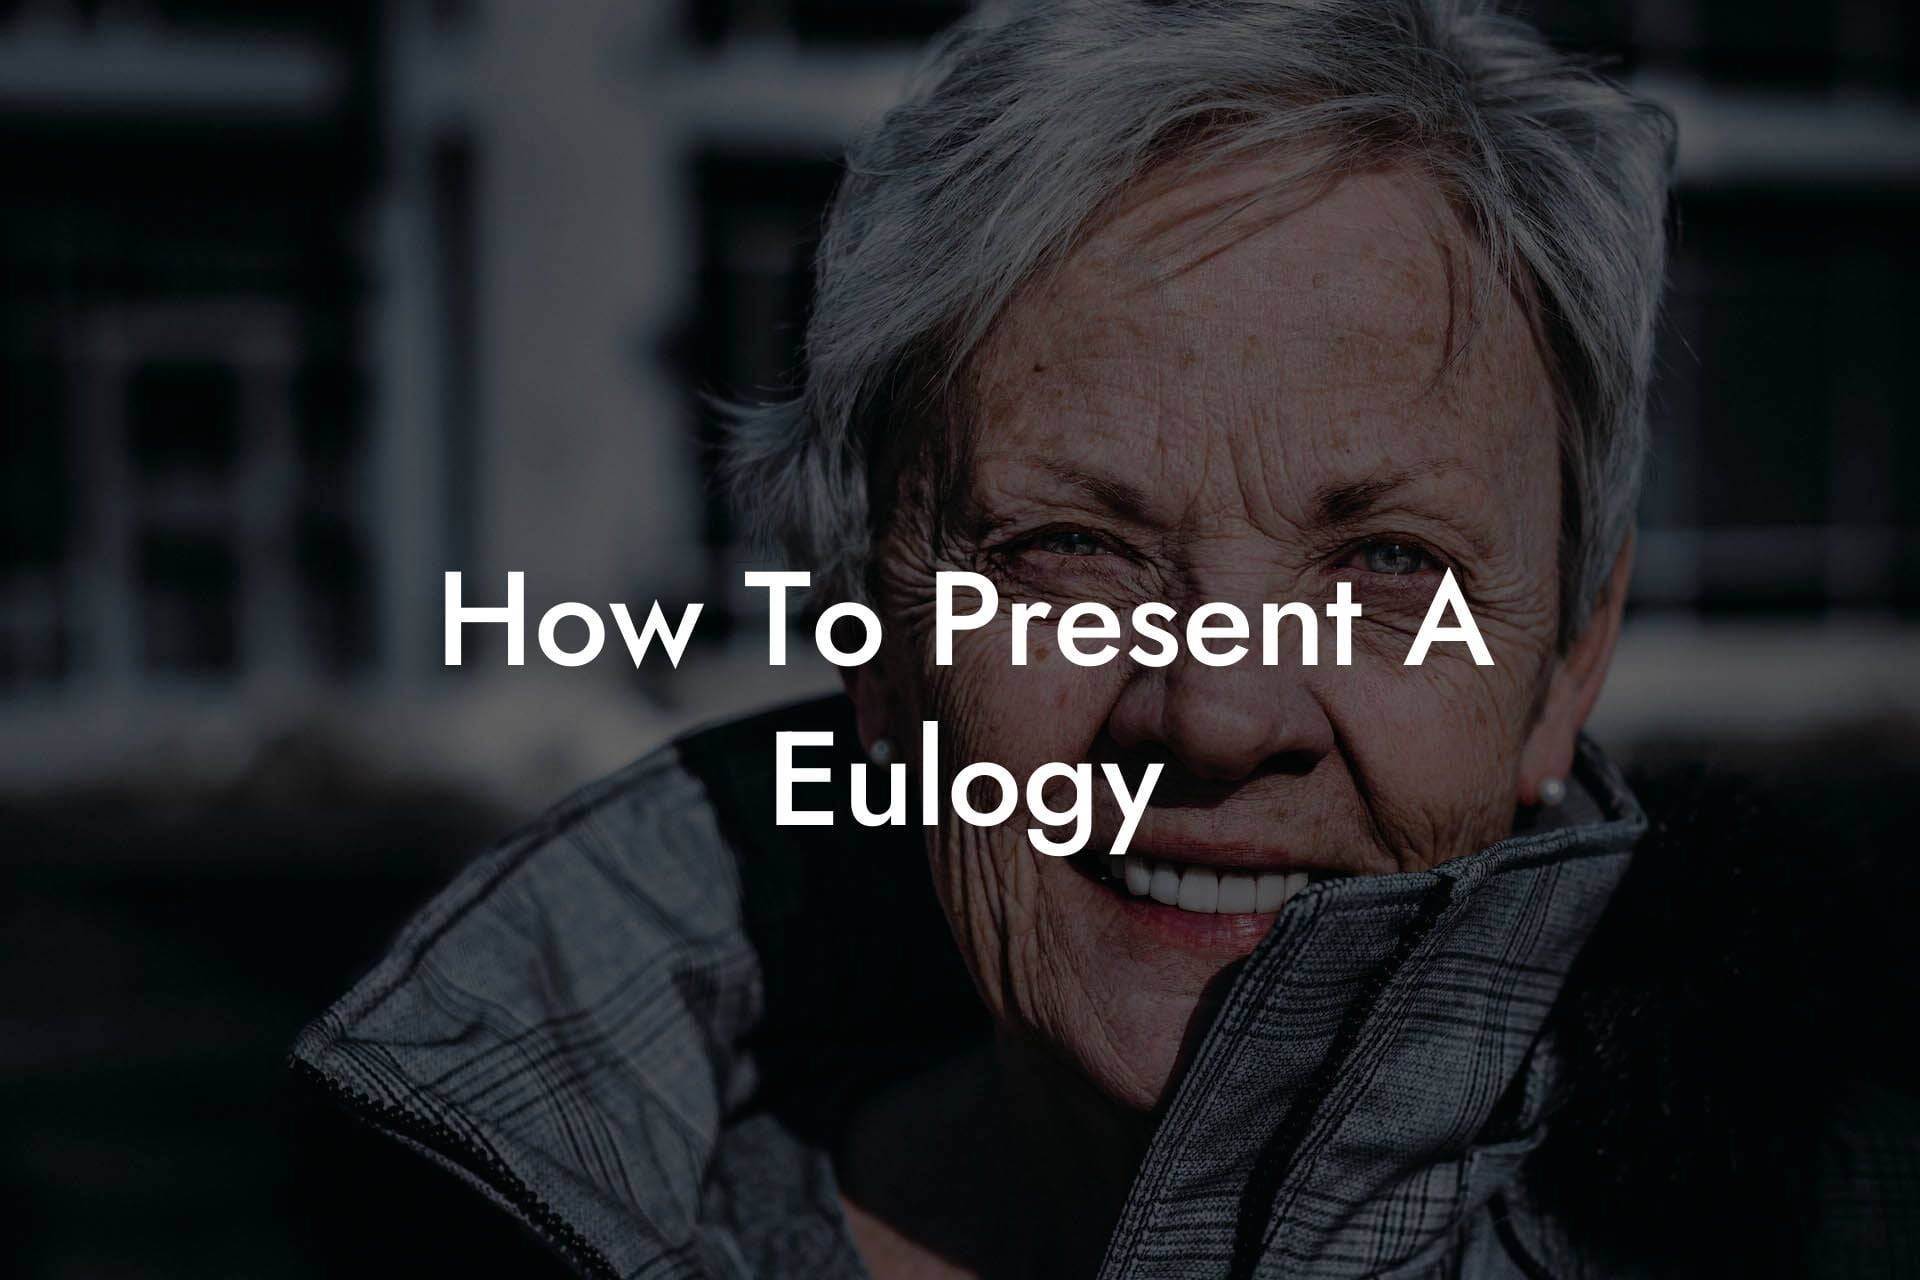 How To Present A Eulogy